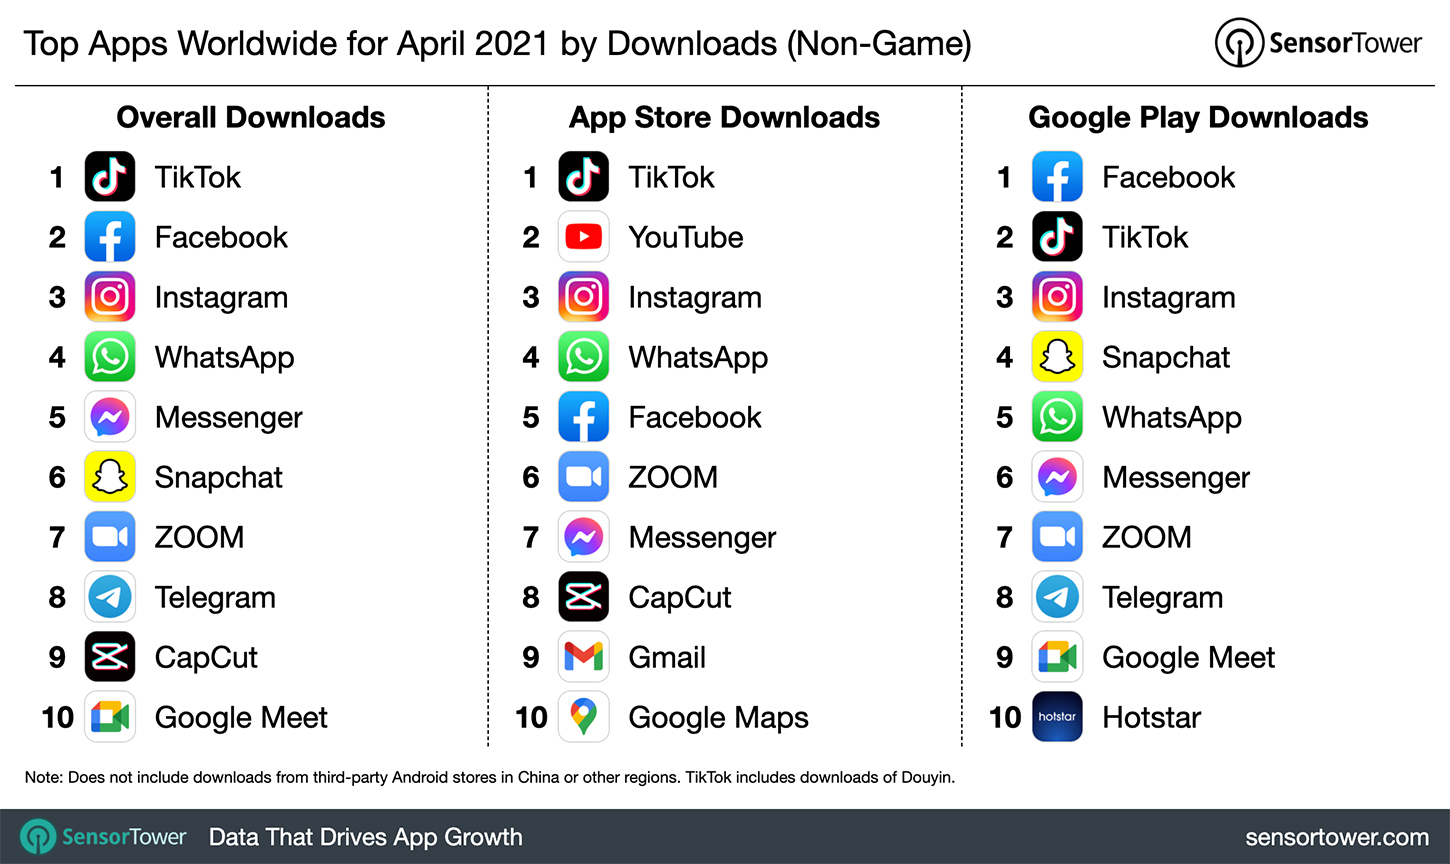 Top Apps Worldwide for April 2021 by Downloads